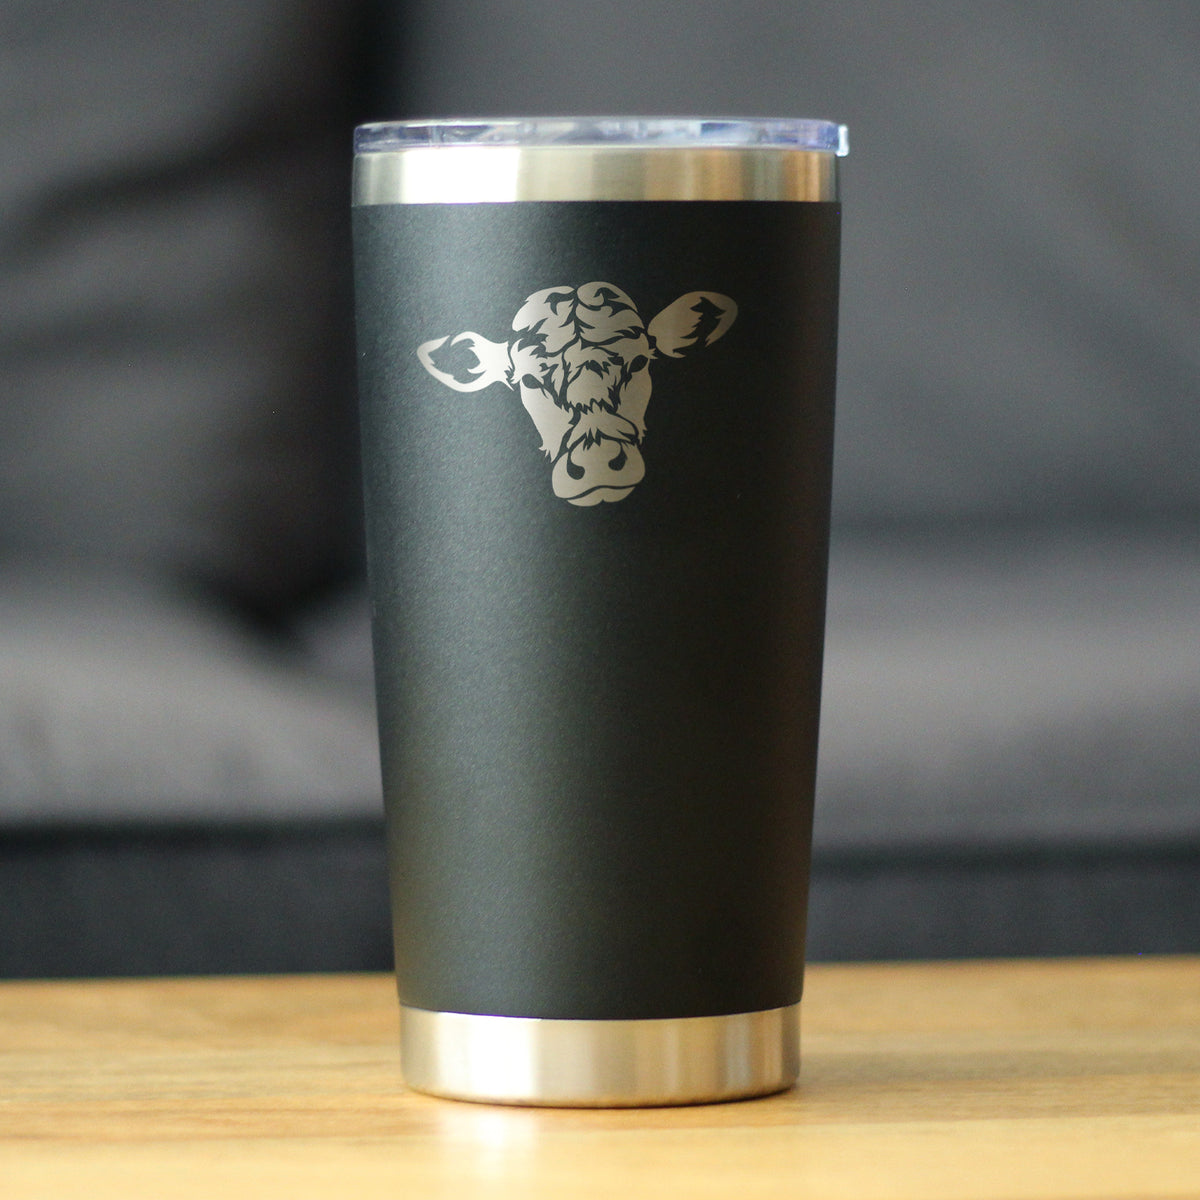 Cow Face - Insulated Coffee Tumbler Cup with Sliding Lid - Stainless Steel Travel Mug - Cow Gift for Women and Men